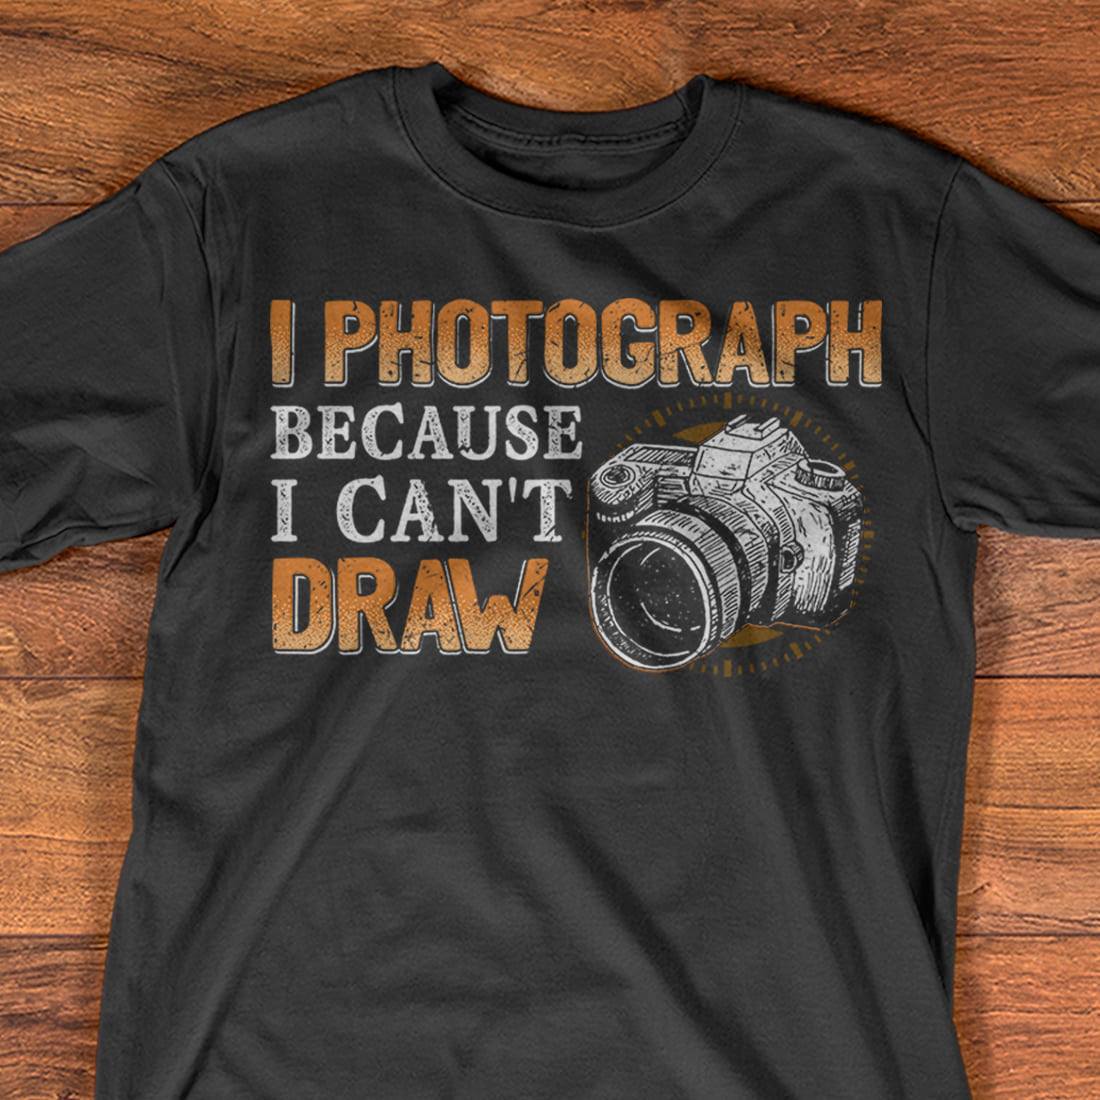 I photograph because I can't draw - The photographer